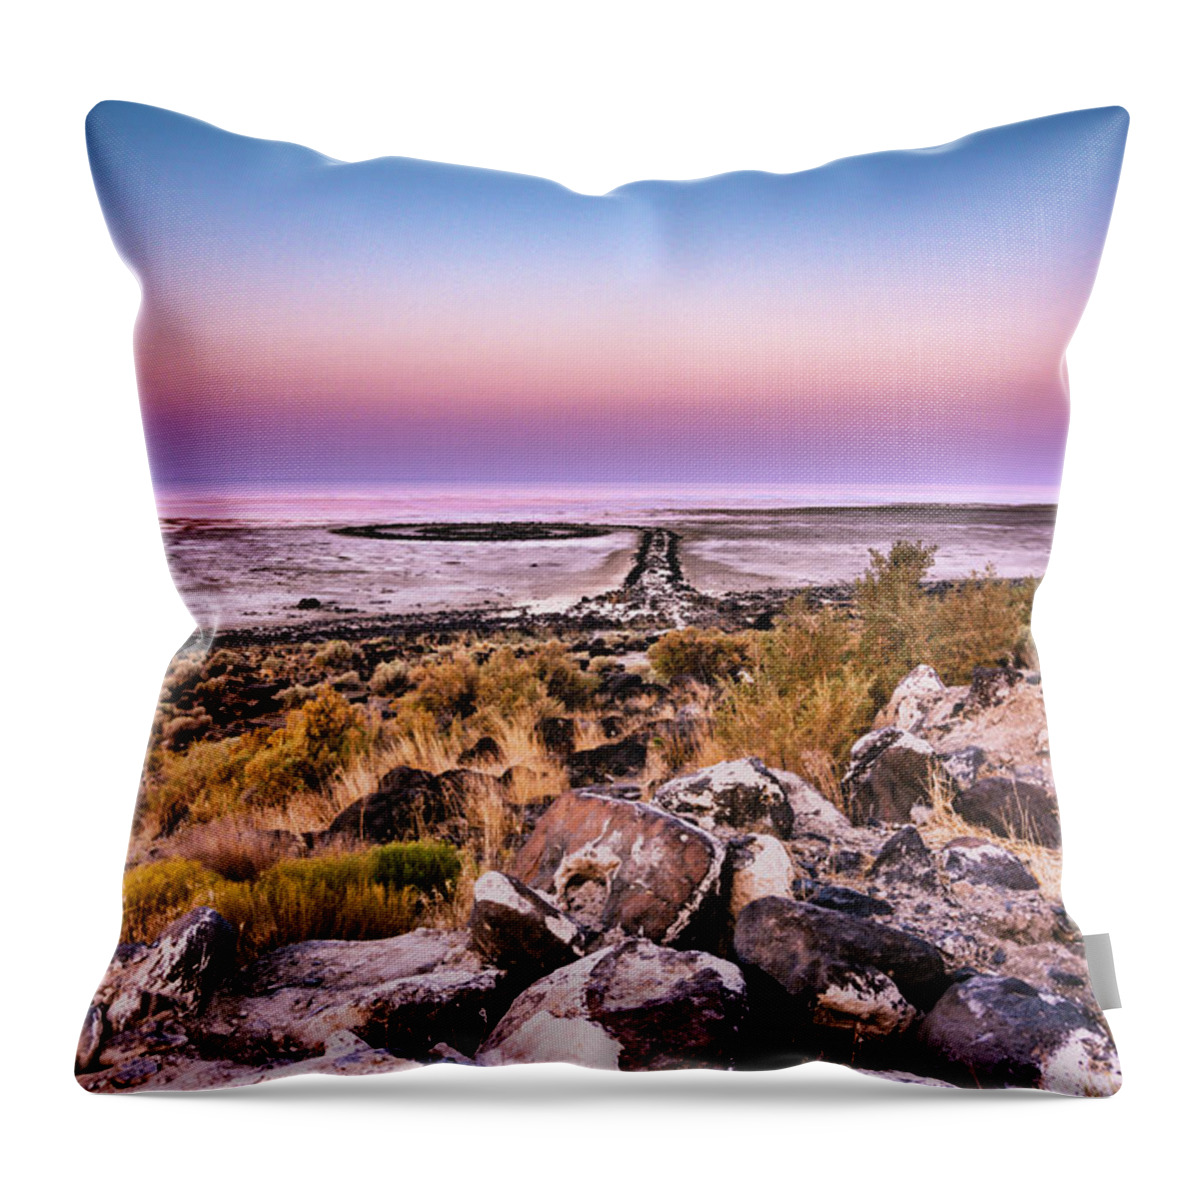 Spiral Jetty Throw Pillow featuring the photograph Spiral Dawn by Bryan Carter